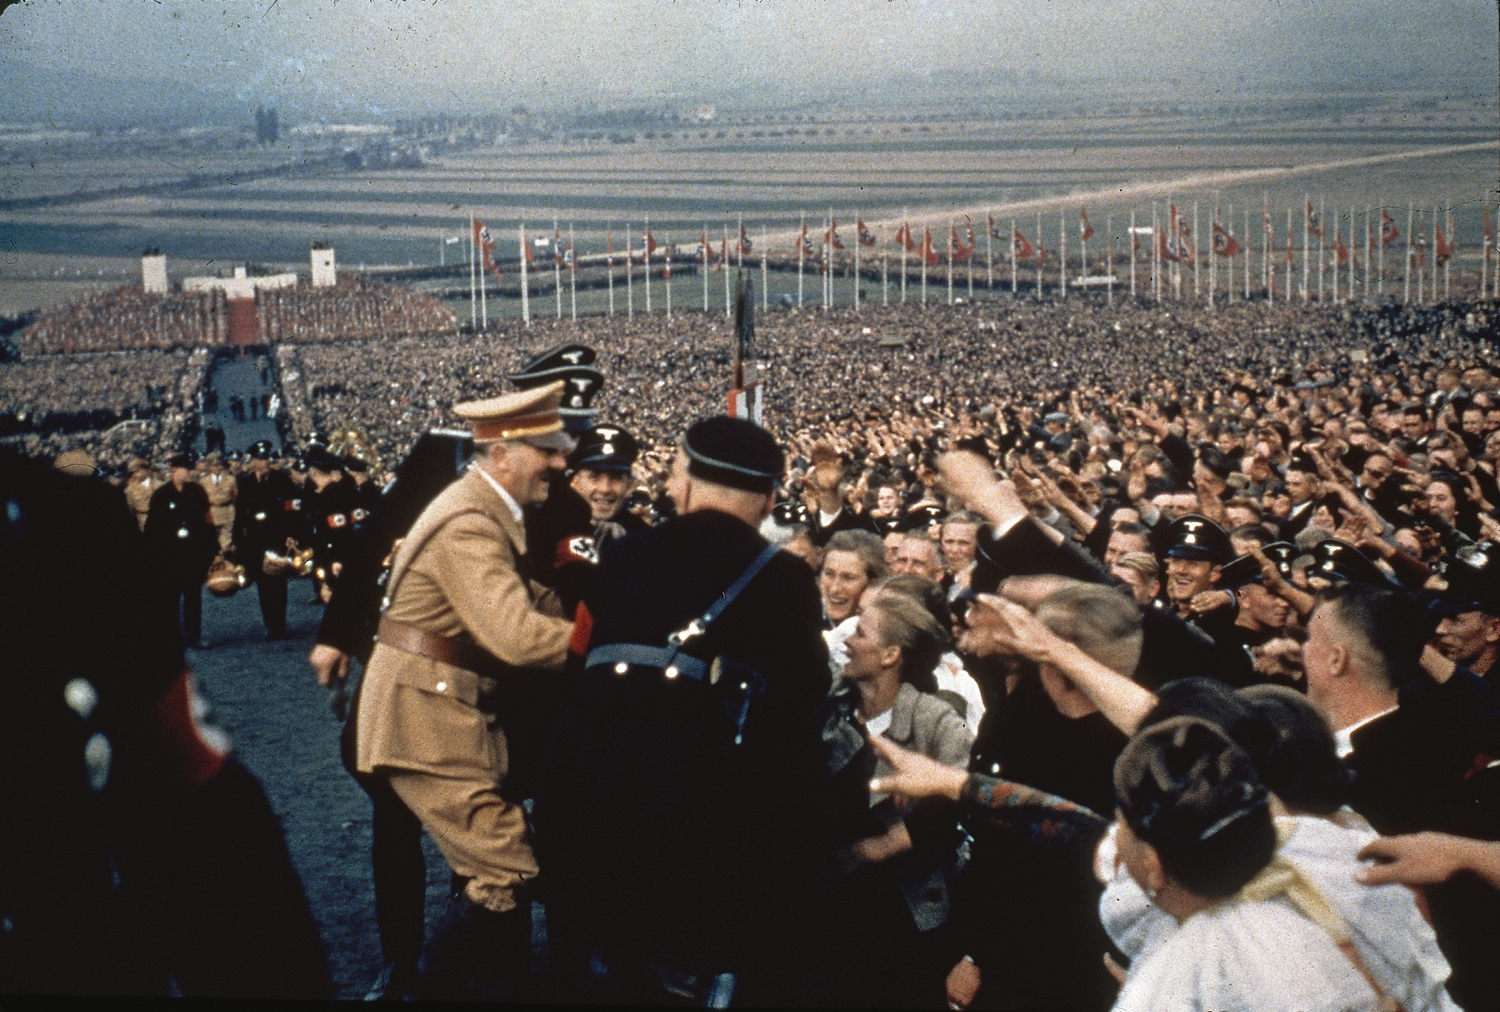 Adolf Hitler greets the cheering throng at a rally in 1937.